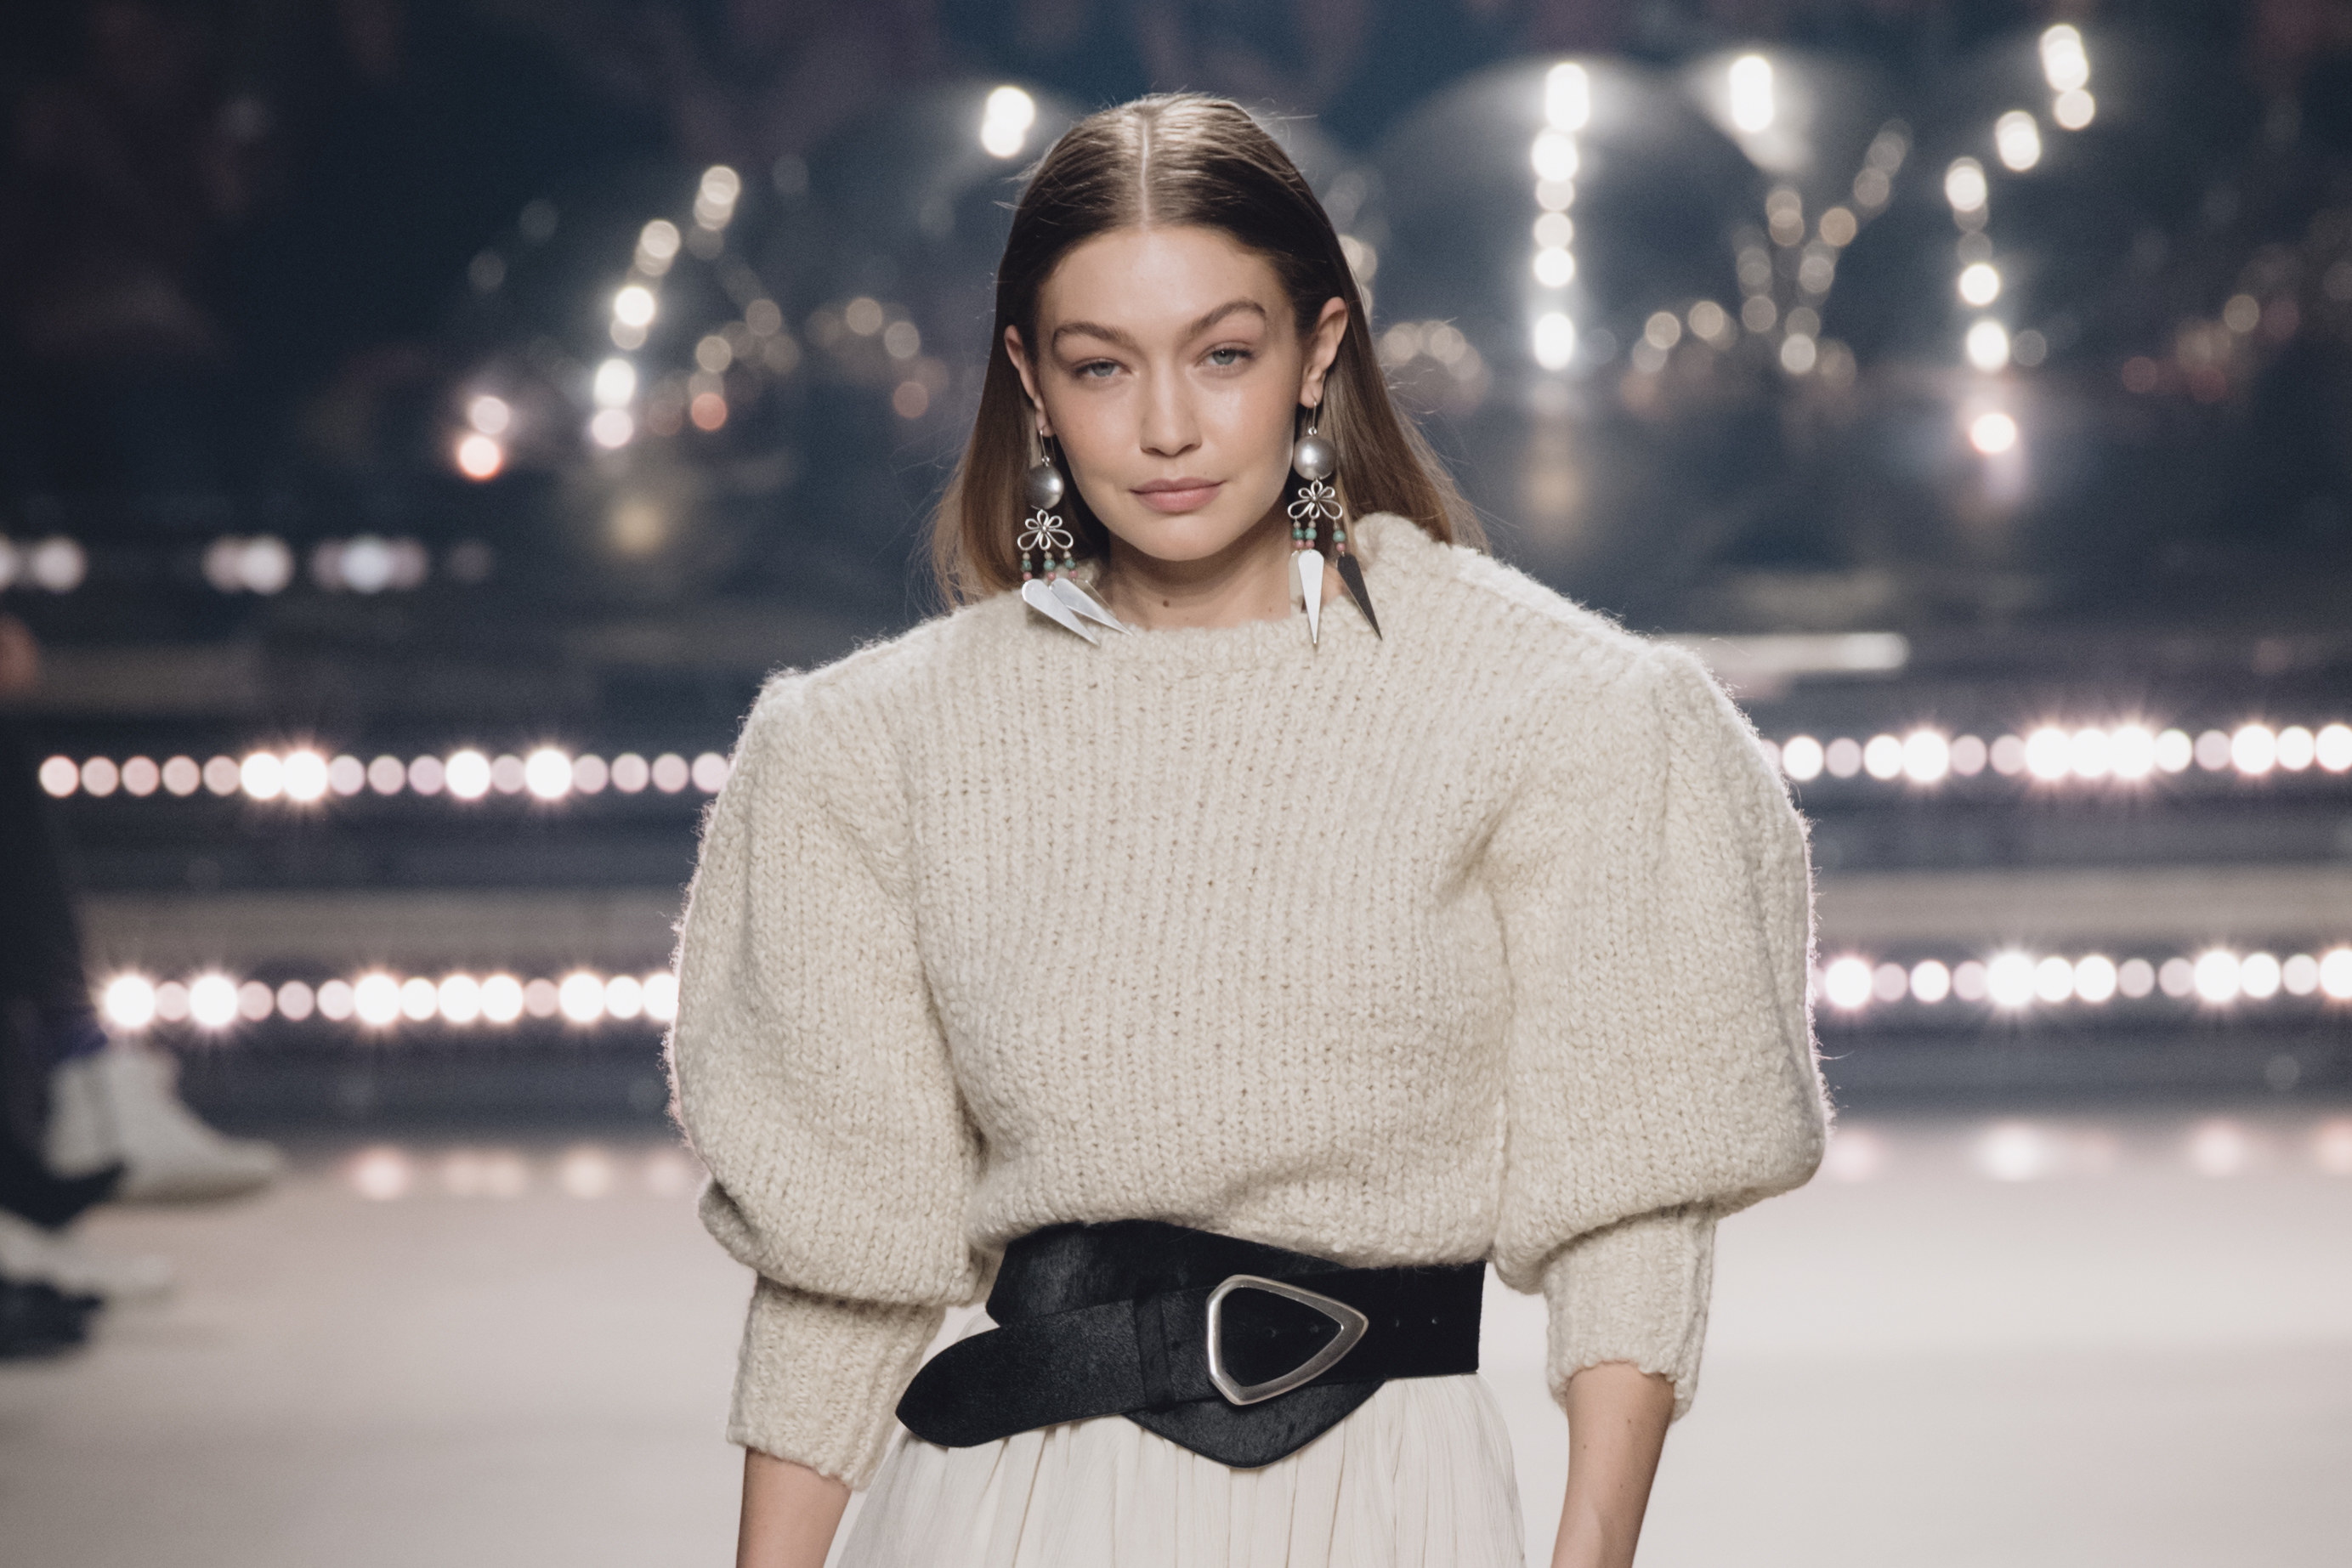 Gigi Hadid walks the runway during the Isabel Marant show as part of Paris Fashion Week Womenswear Fall/Winter 2020/2021 on February 27, 2020 in Paris, France